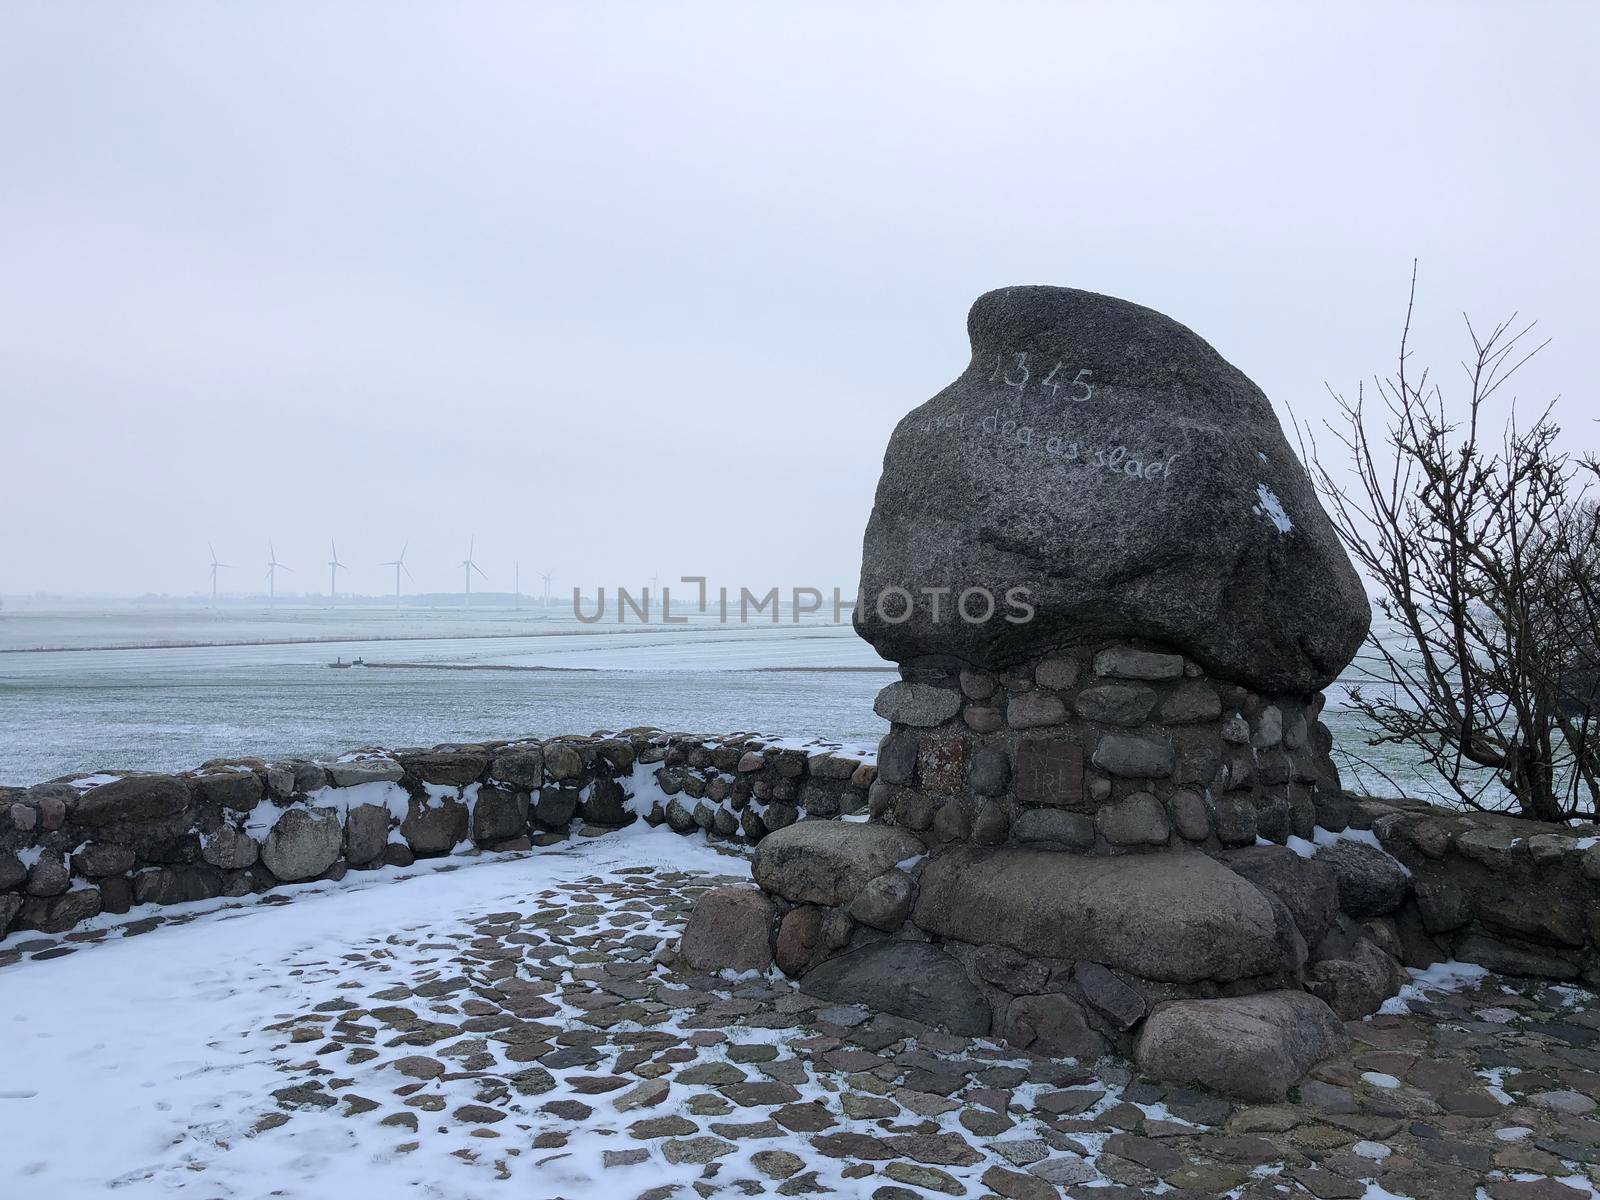 The monument of the battle of Warns during winter in Friesland The Netherlands